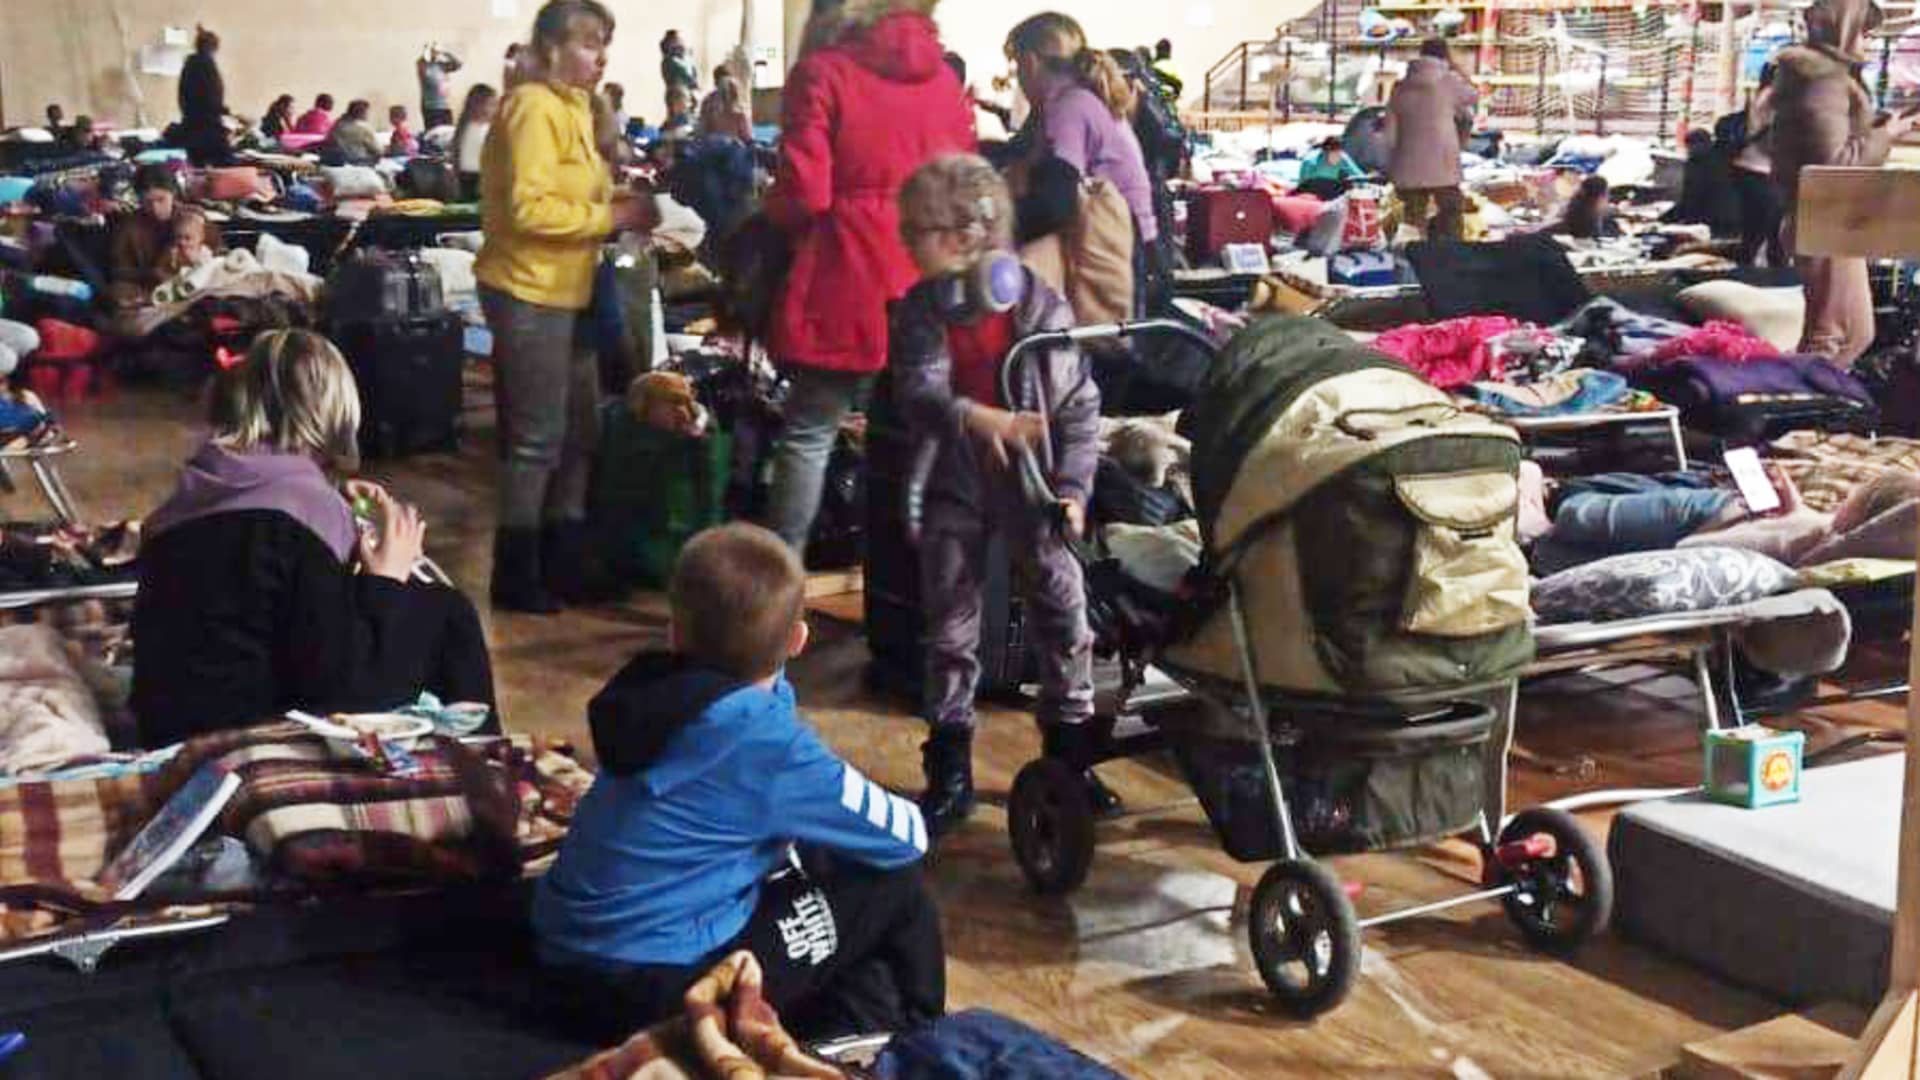 Ukrainian refugees taking shelter at a facility near the Hrubieszow border in Poland on March 4th, 2022.